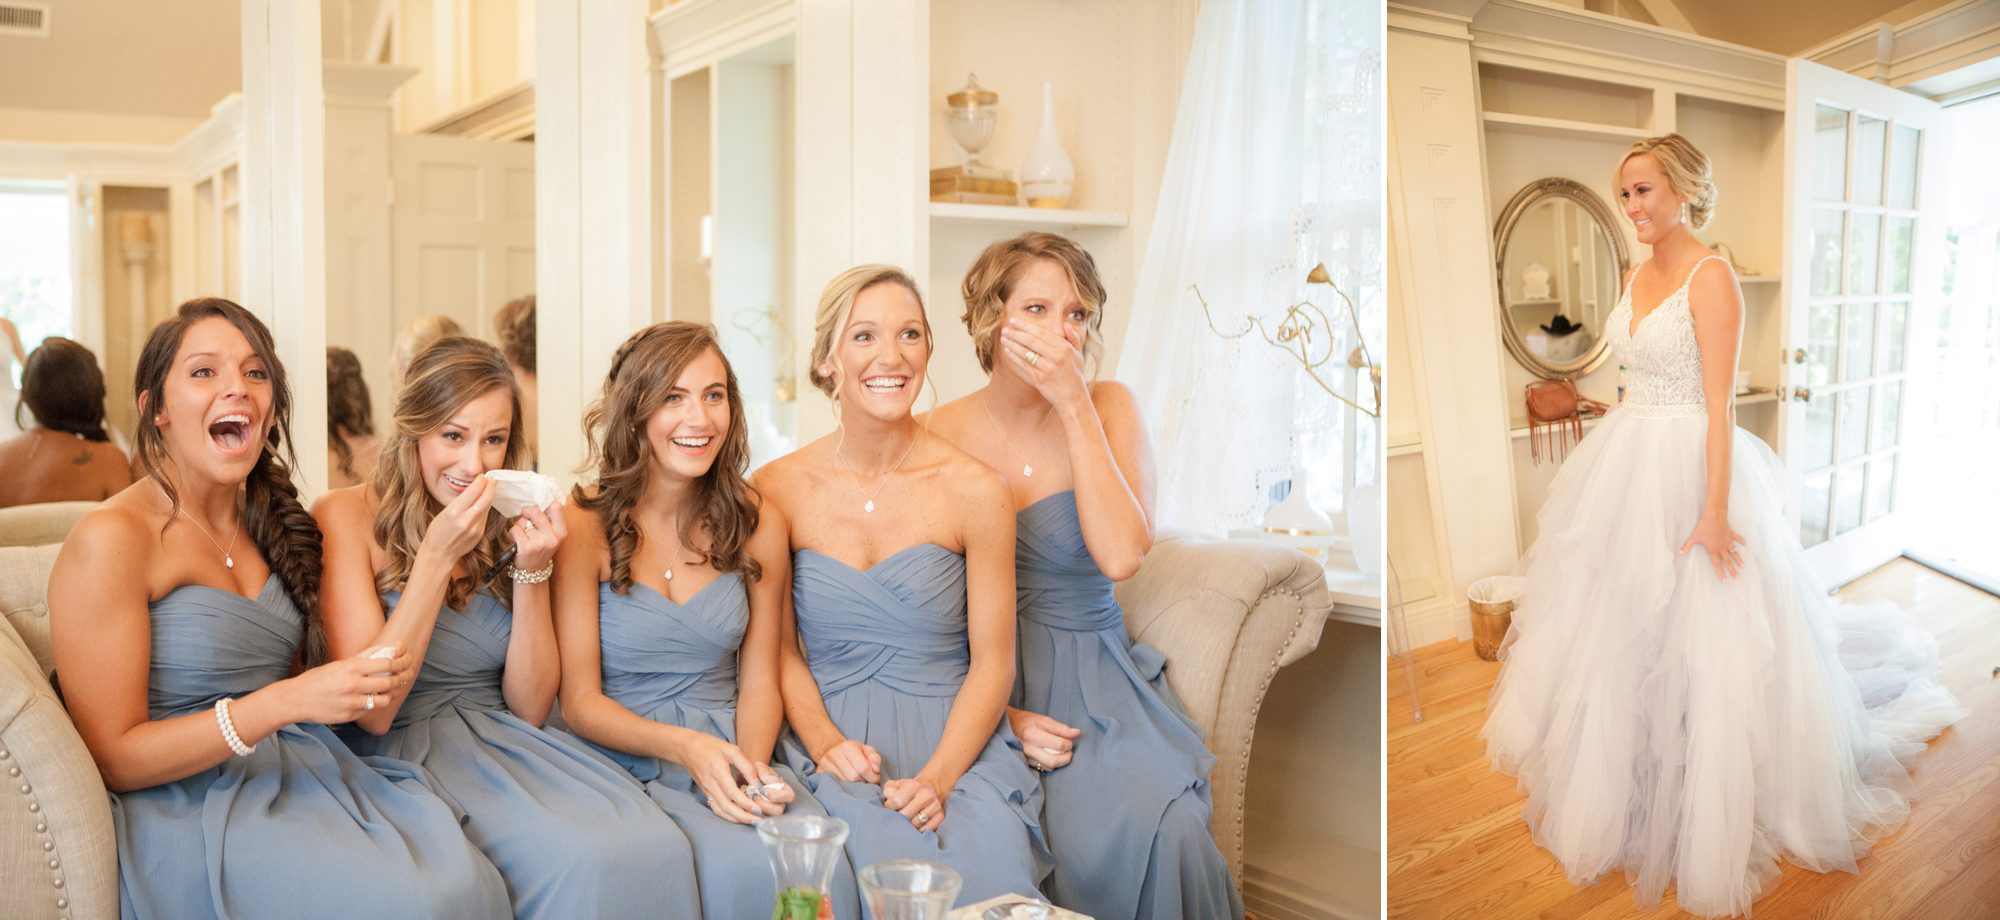 Bridesmaid's reaction to seeing bride in dress, Wedding photography at Cedarwood Weddings and Estate in Nashville, TN photography by Krista Lee Photography